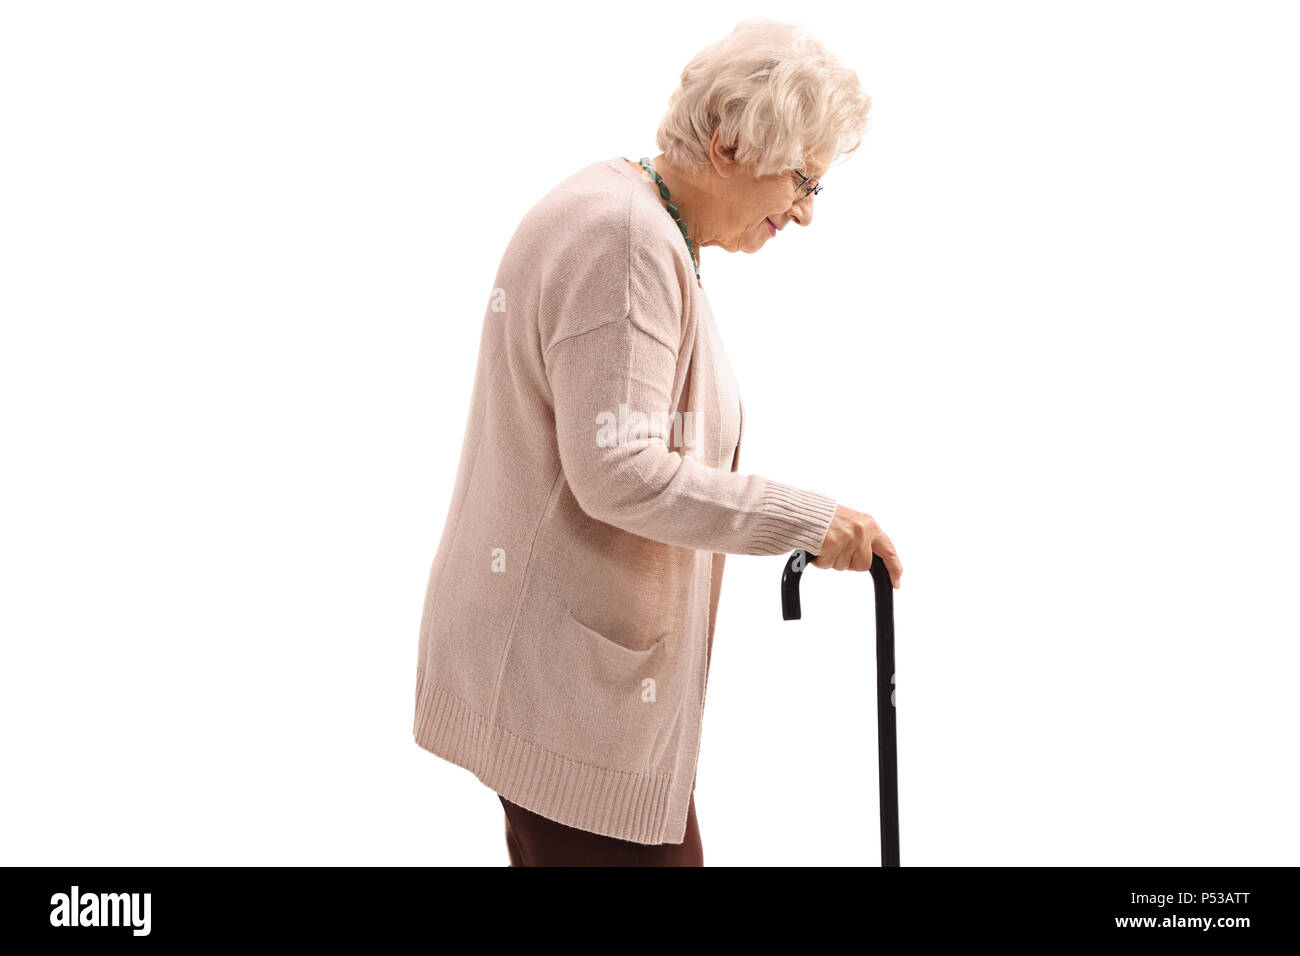 Elderly woman with a cane isolated on white background Stock Photo